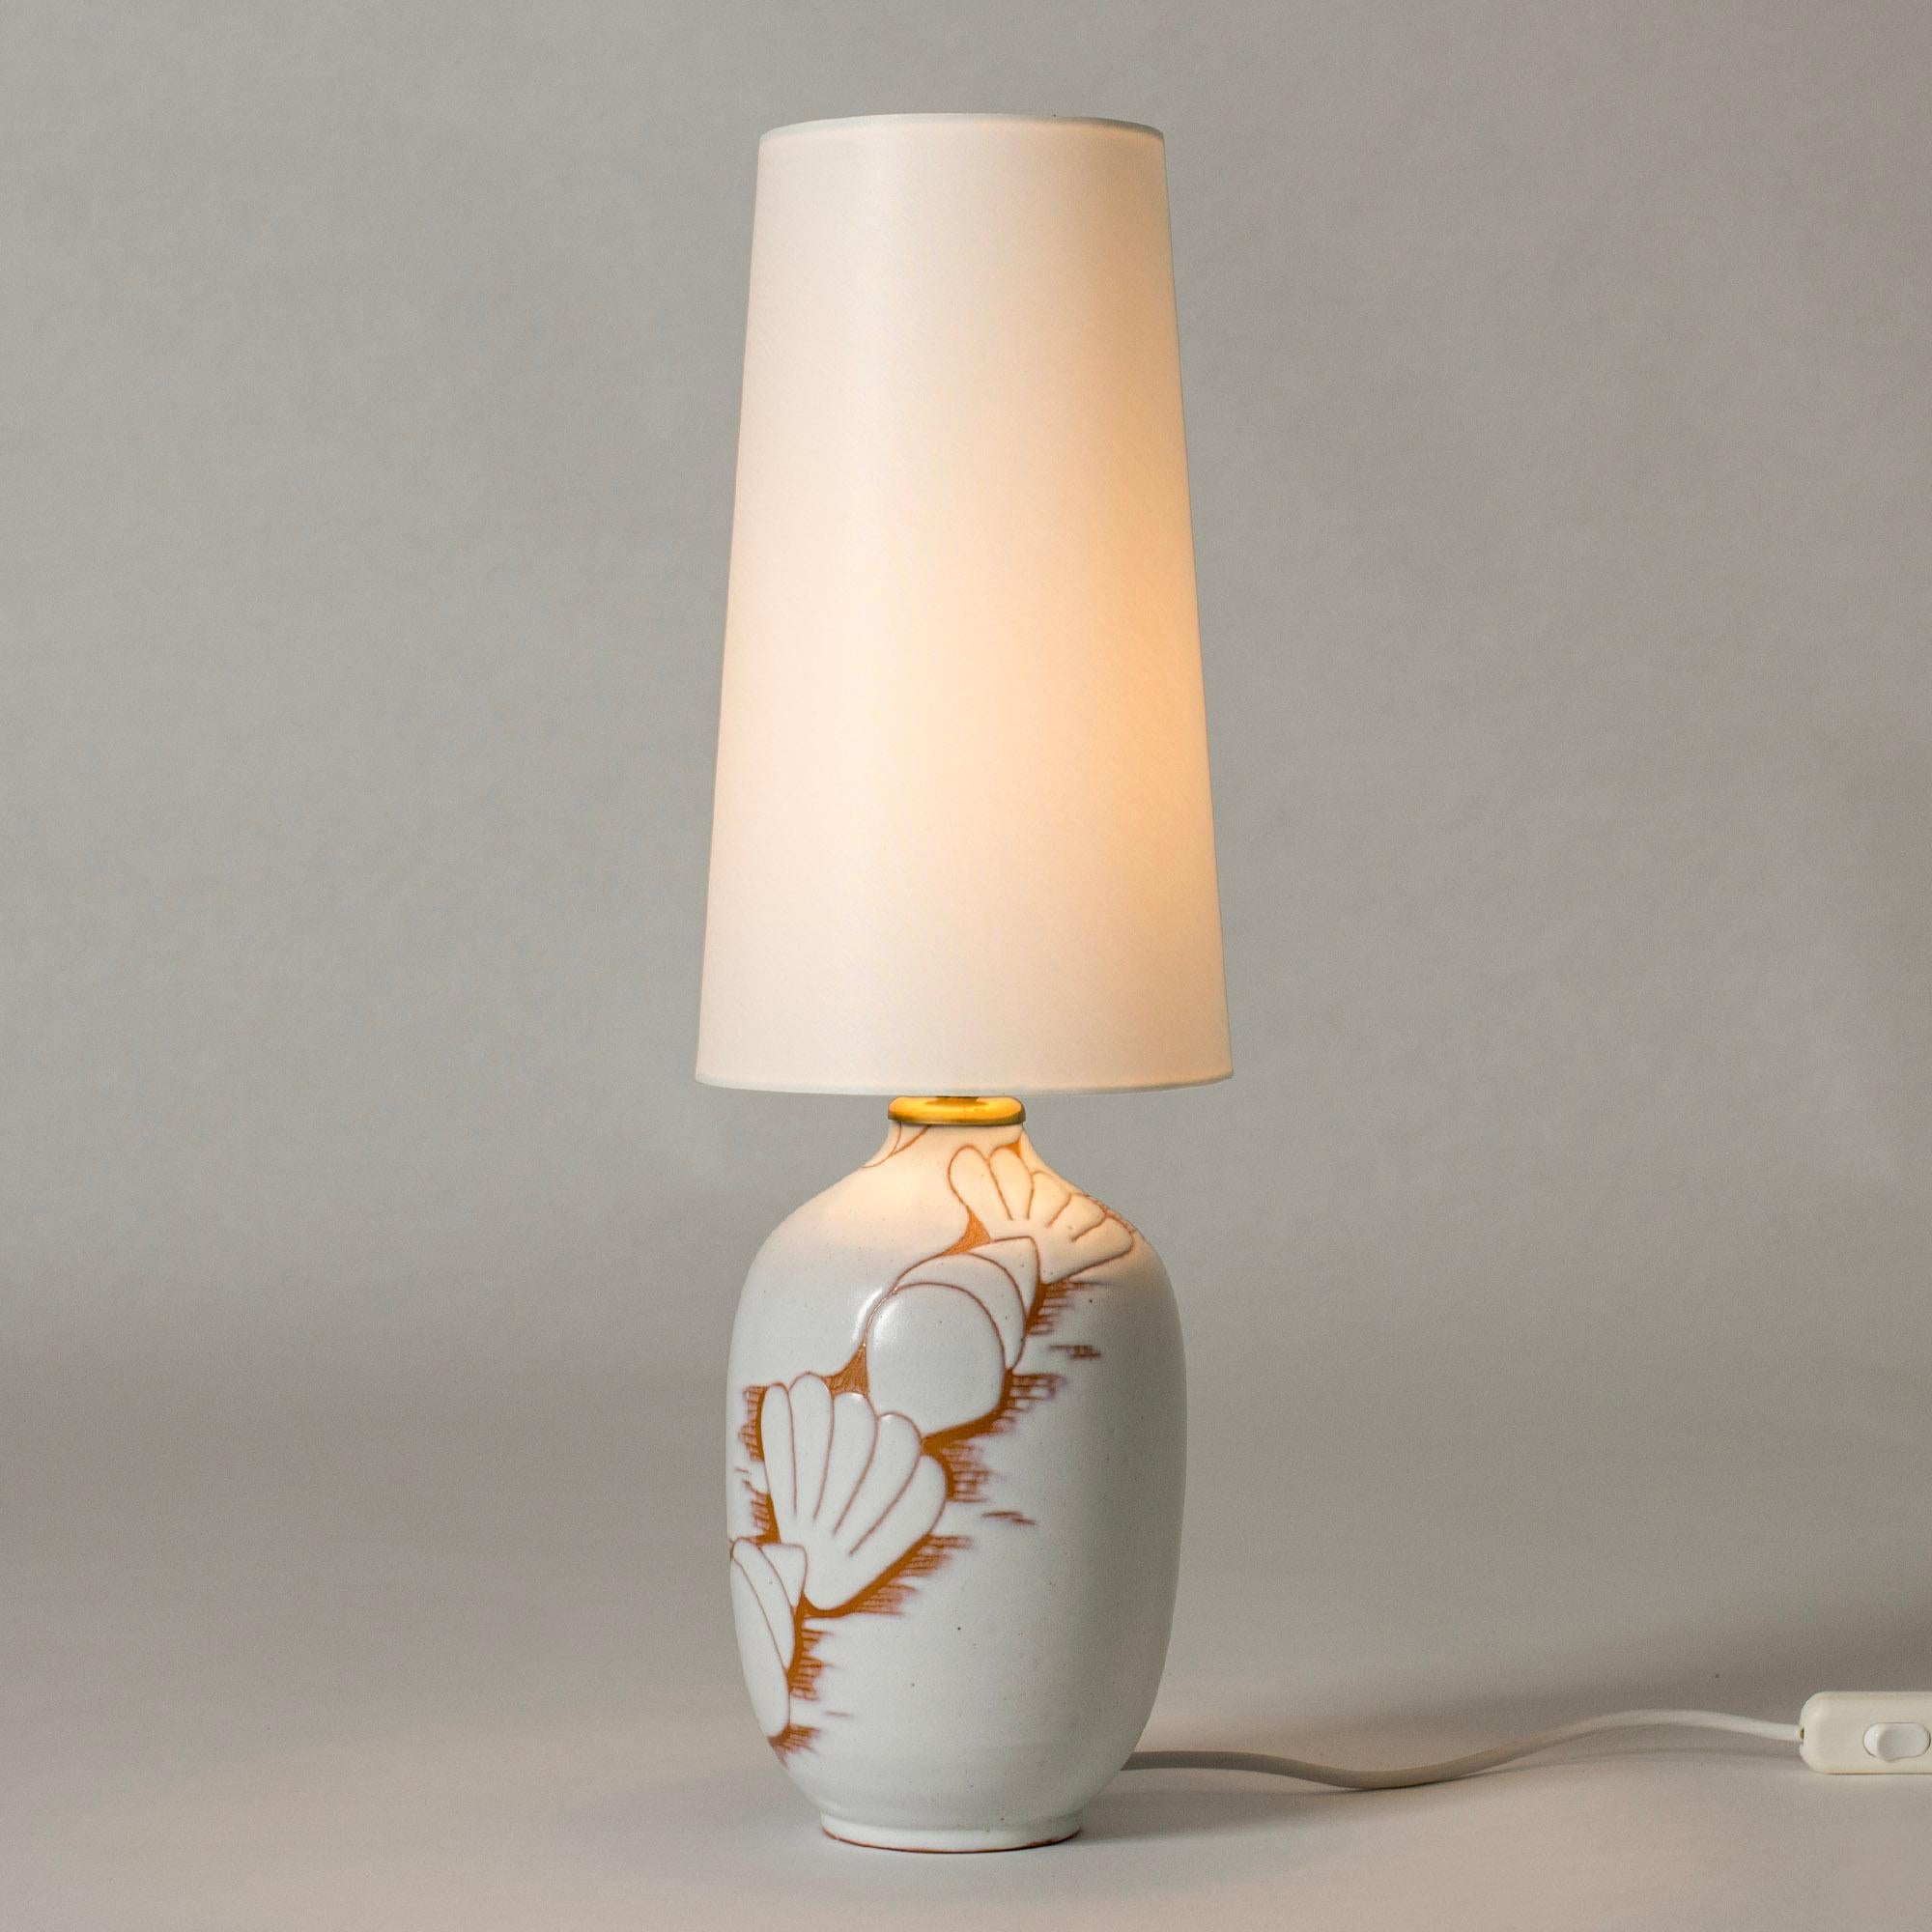 Lovely earthenware table lamp by Anna-Lisa Thomson, glazed white over an elegant decor of shells.

The artist Anna-Lisa Thomson is best known for her stoneware and earthenware for Upsala-Ekeby where she worked from the mid 1930s until her untimely